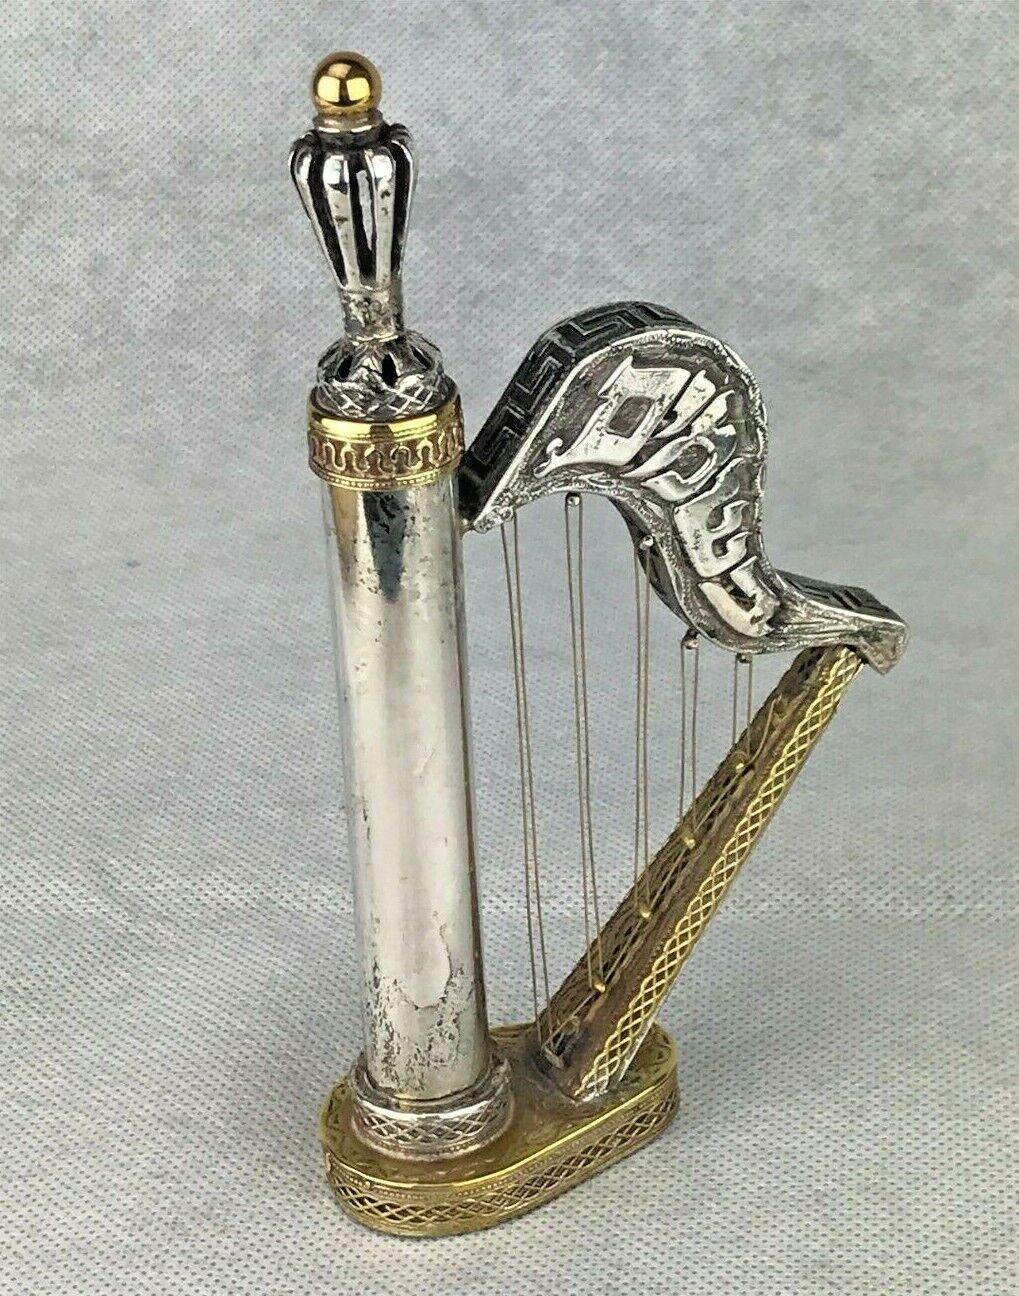 A sterling silver Besamim (spice) container, In the shape of Harp with Hebrew letters 